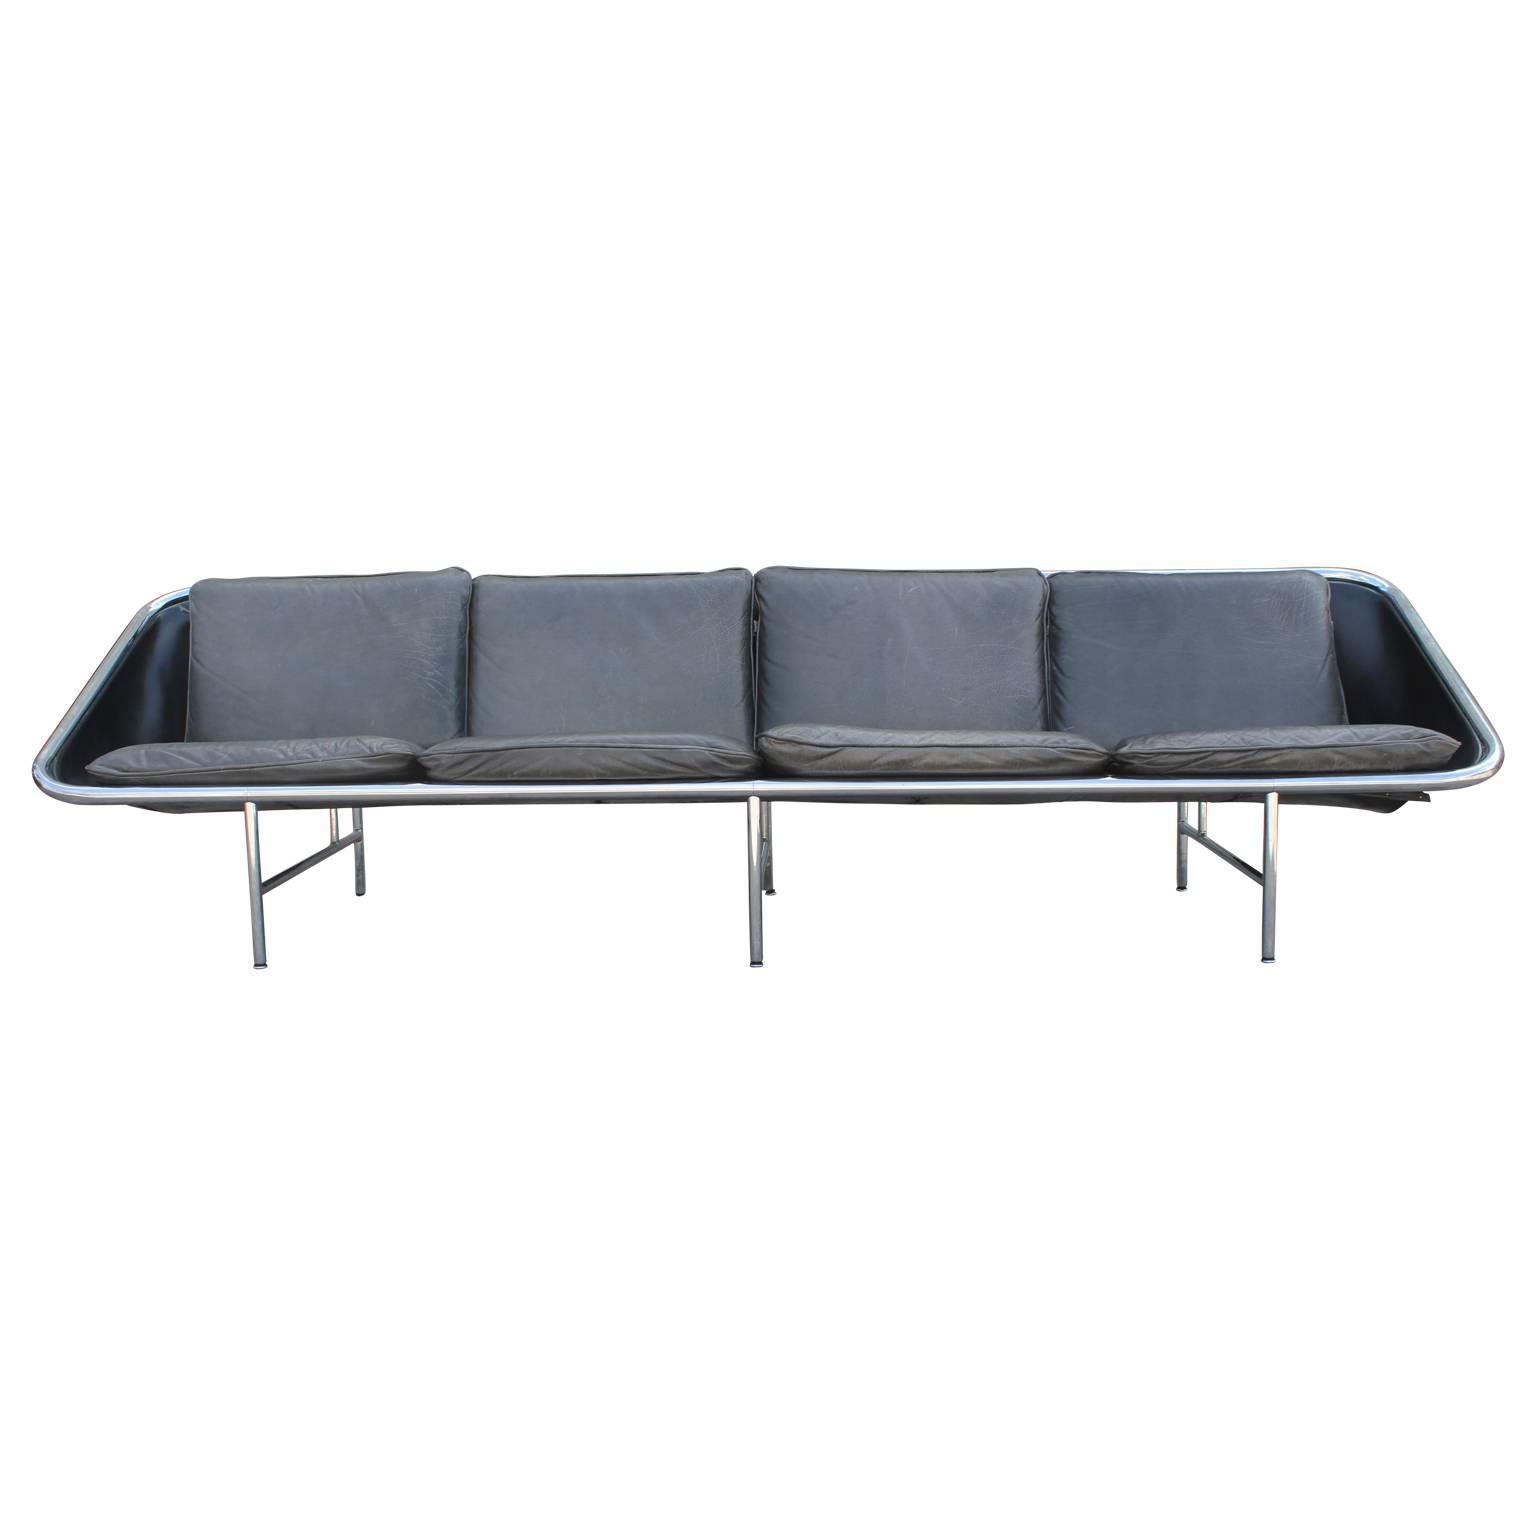 Unique George Nelson for Herman Miller four-seat sofa made of chrome and custom-made cushions in water buffalo leather. There are optional triangular arm pillows available, as seen in the last photo. Extremely sleek and a perfect addition to any